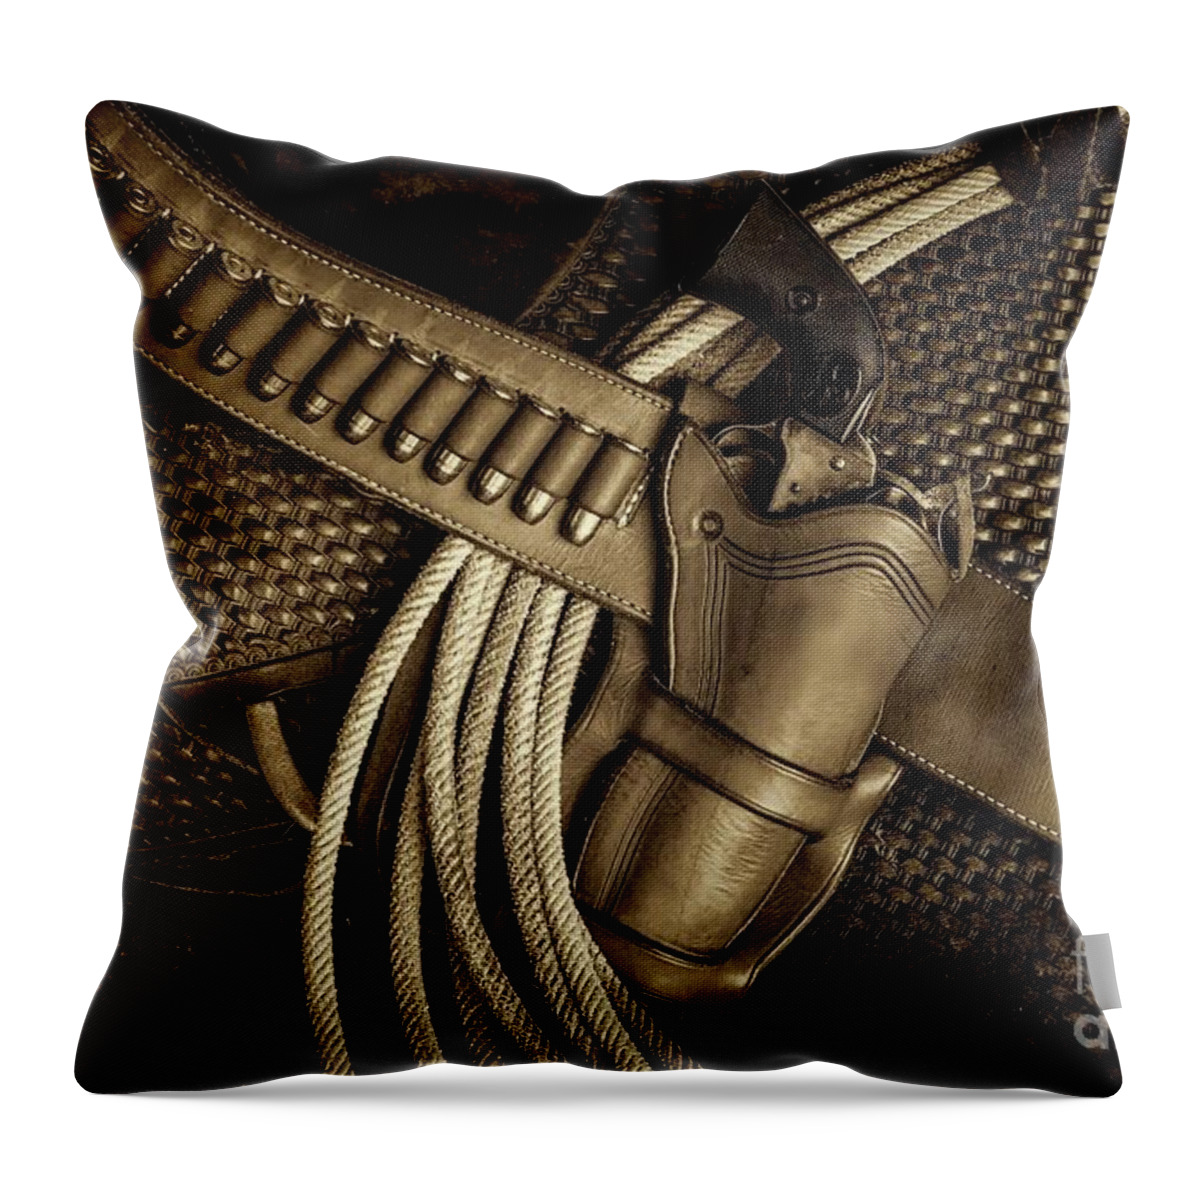 Jon Burch Throw Pillow featuring the photograph Leather and Lead by Jon Burch Photography